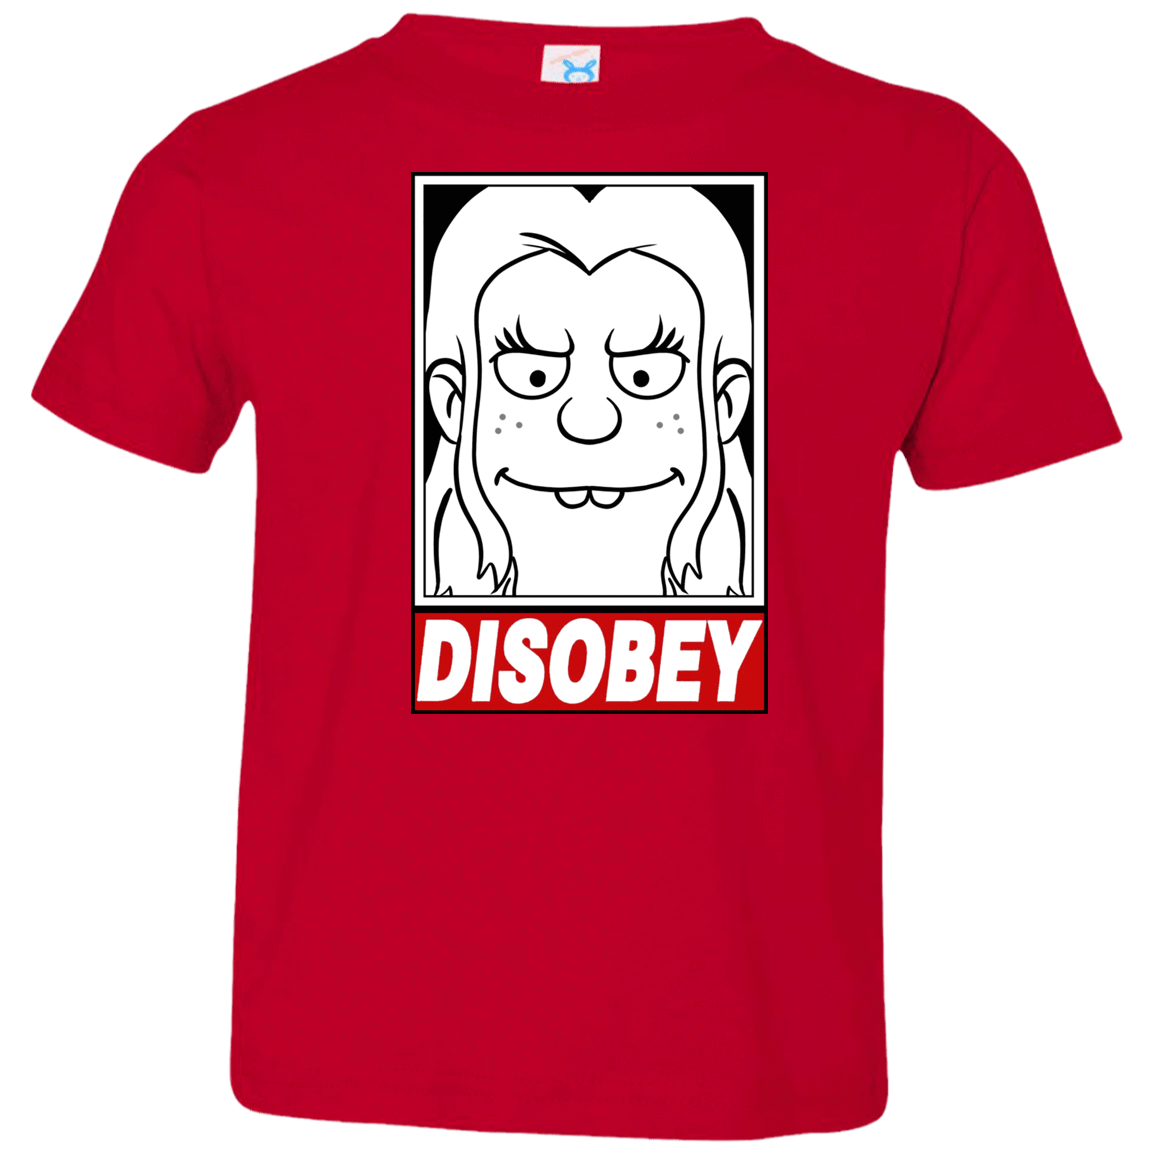 T-Shirts Red / 2T Disobey Toddler Premium T-Shirt